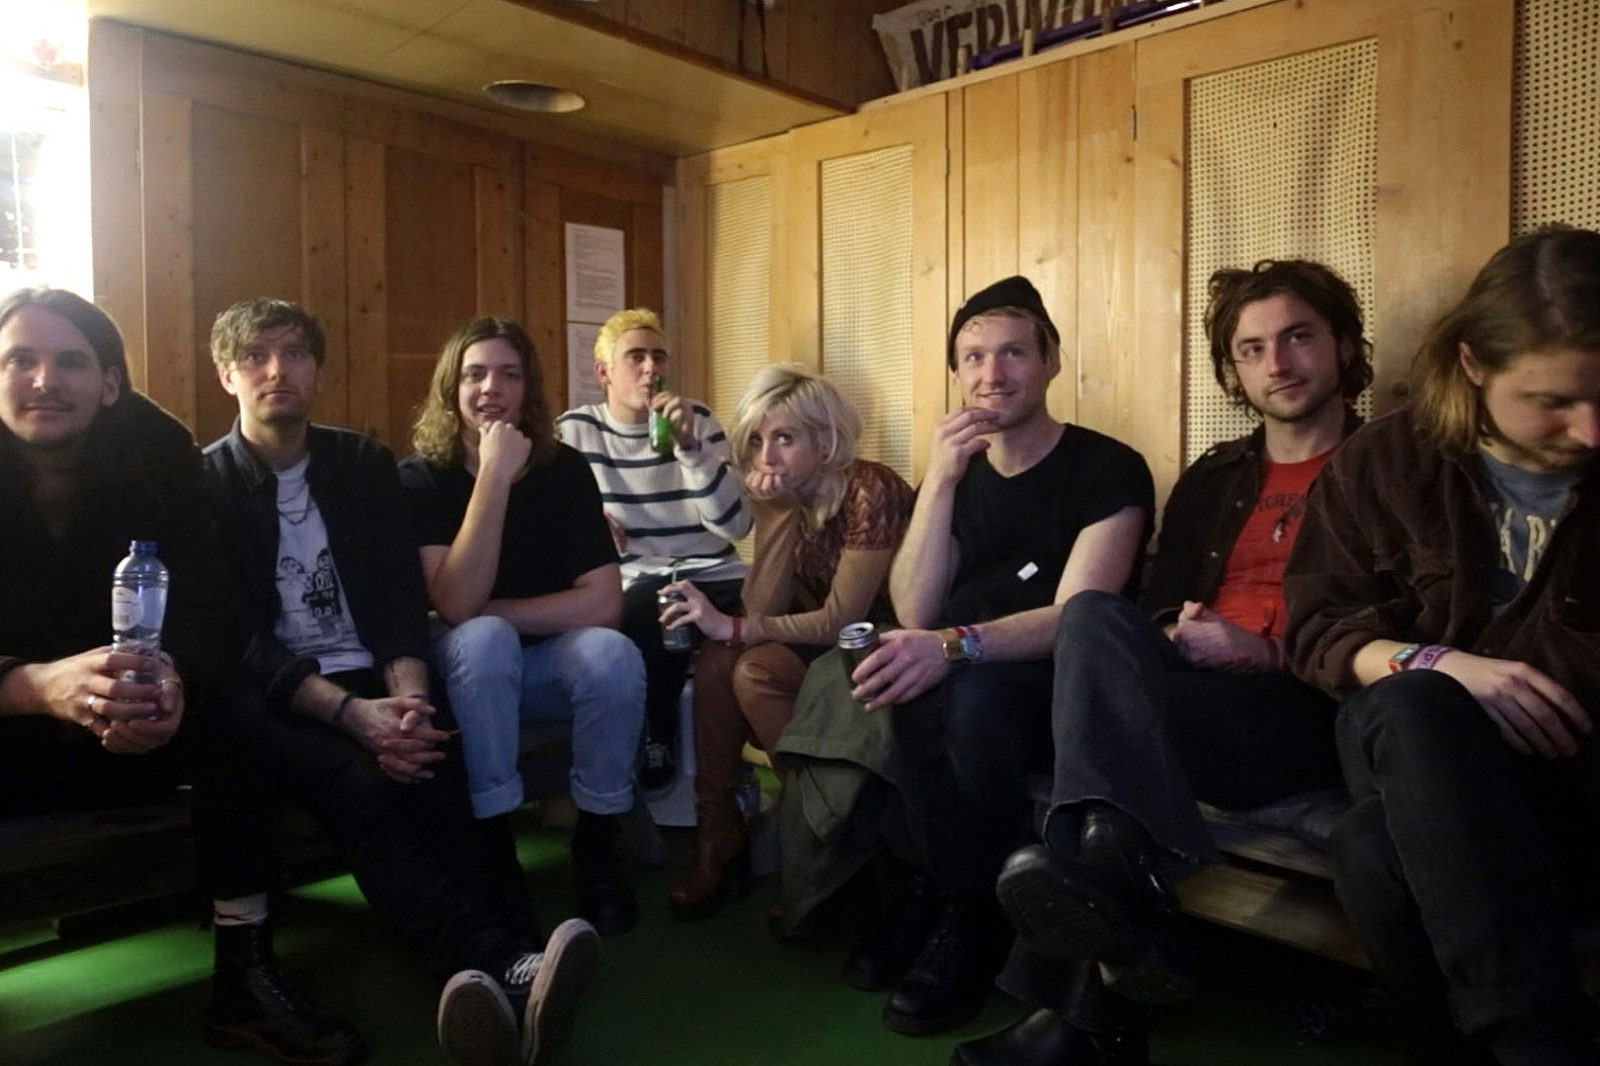 Ahoy 2016: DIY at Eurosonic - watch VANT and Black Honey interview each other, plus Oscar, The Parrots and more